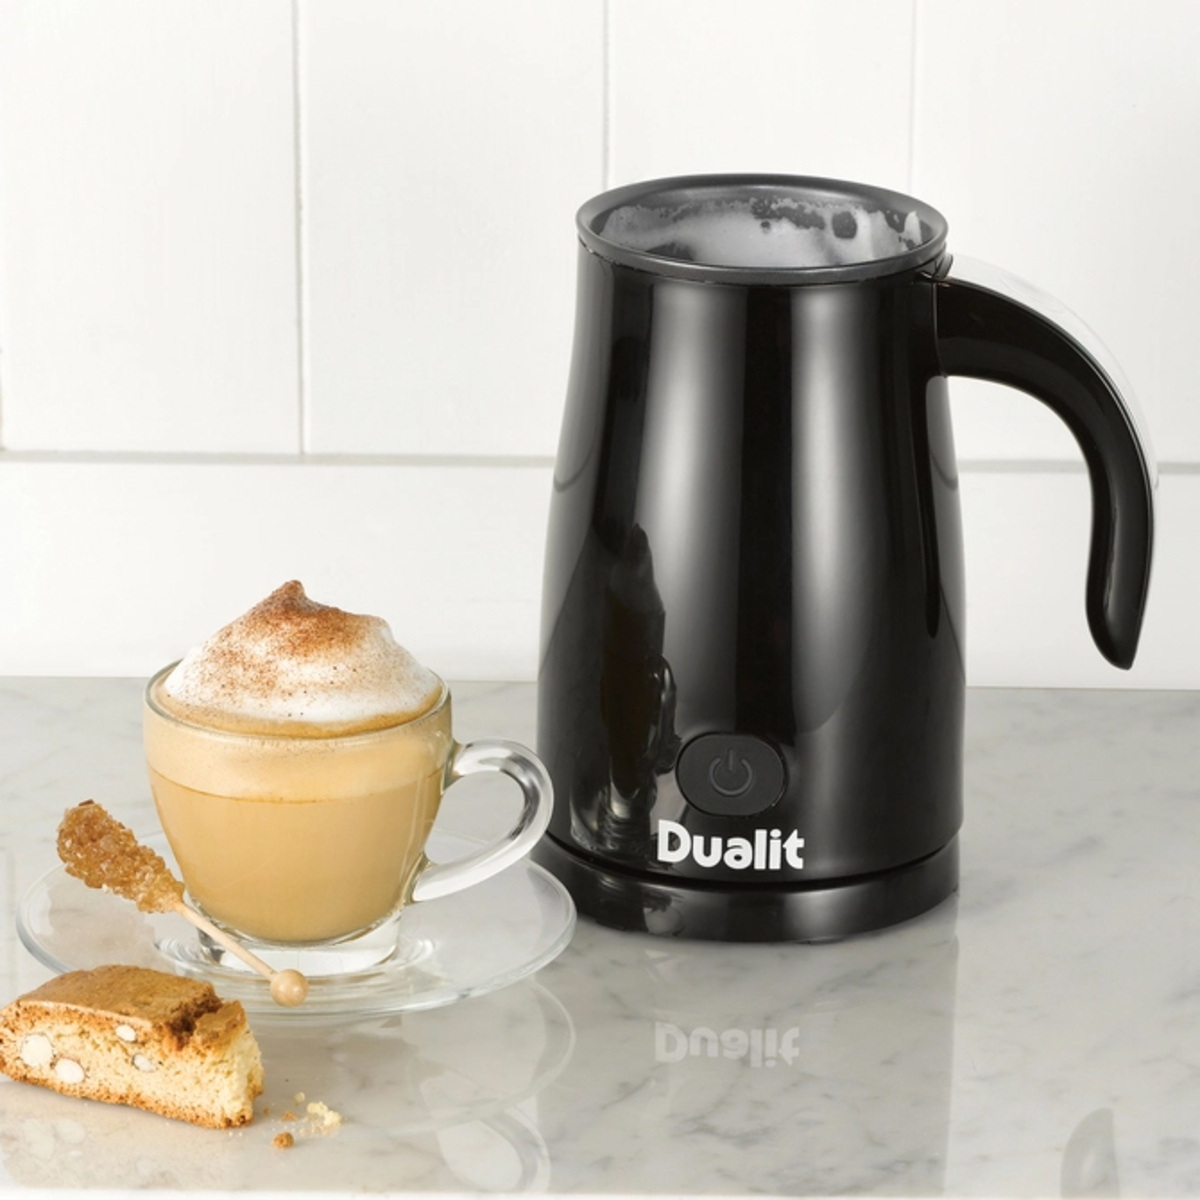 Dualit 84135 Cordless 320ml Milk Frother, Black